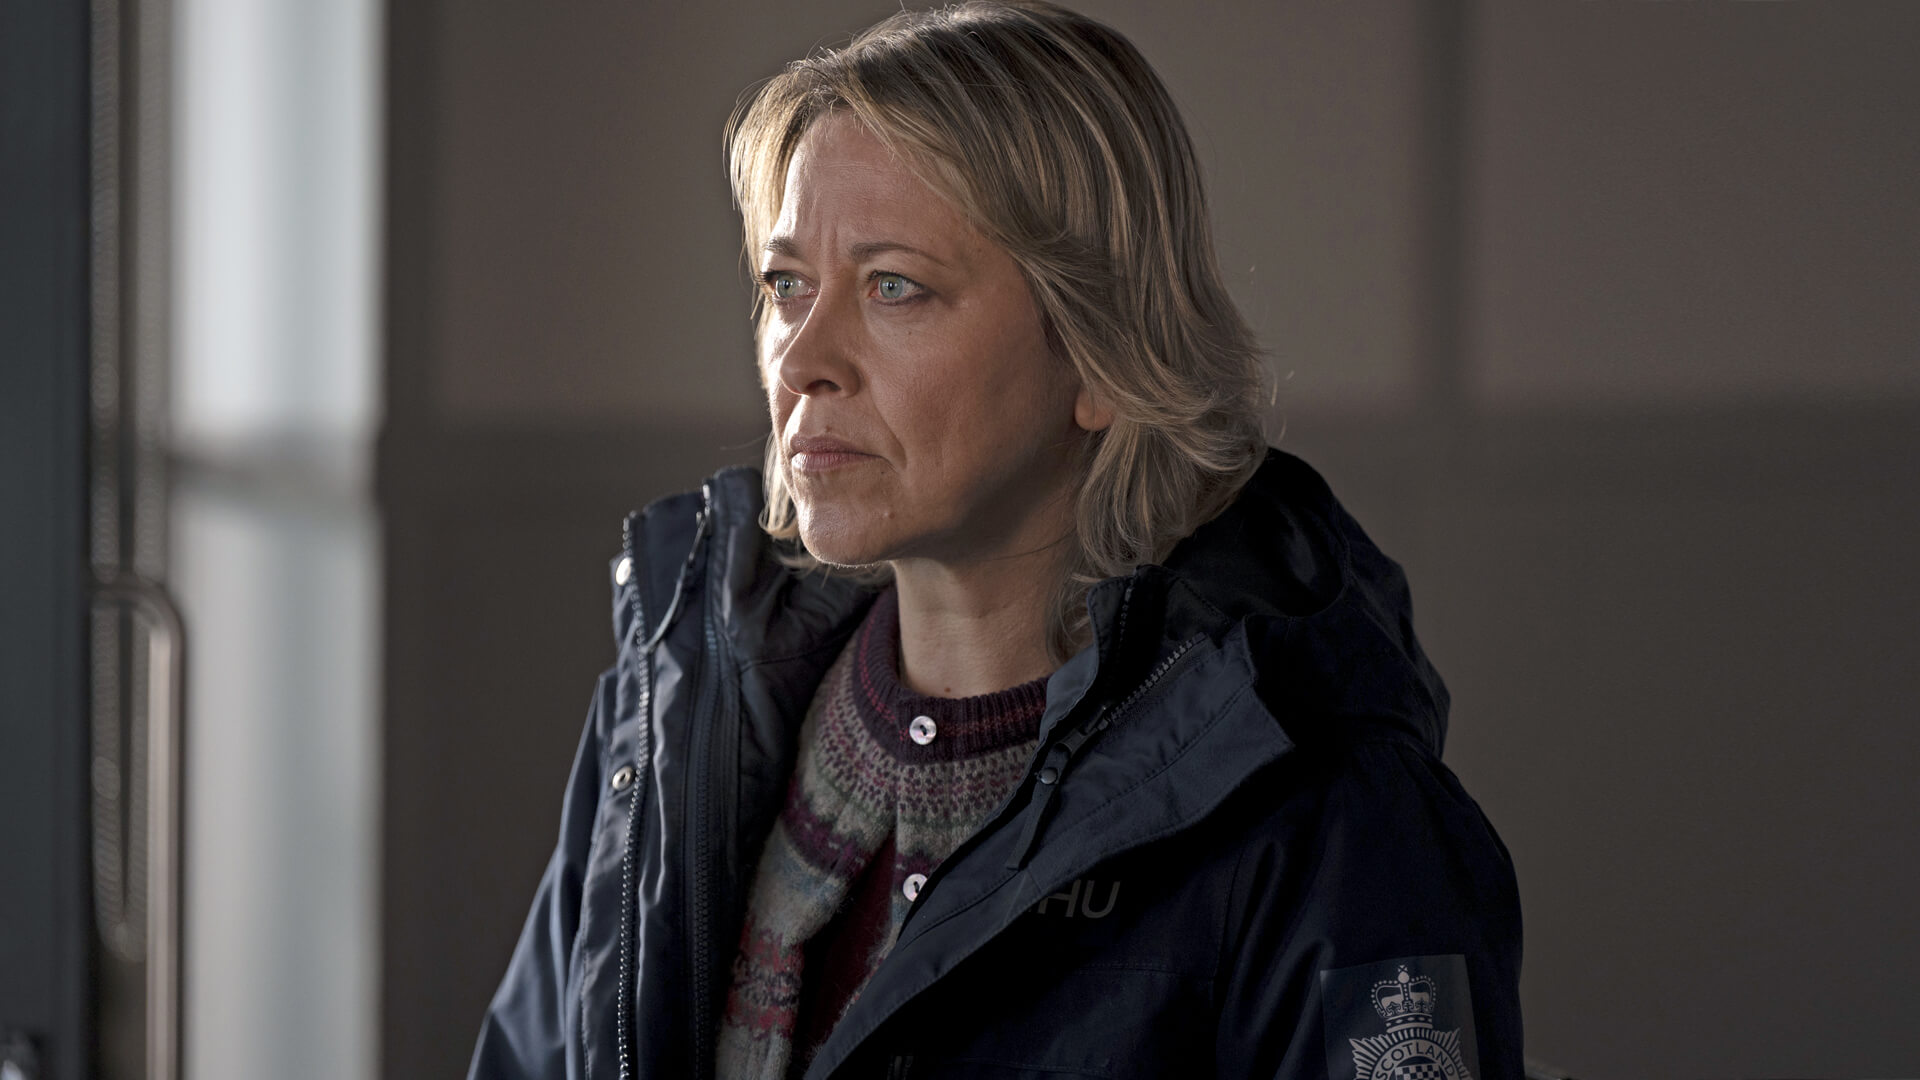 Actor Nicola Walker as DI Annika Strandhed in the crime series Annika on MASTERPIECE on PBS.